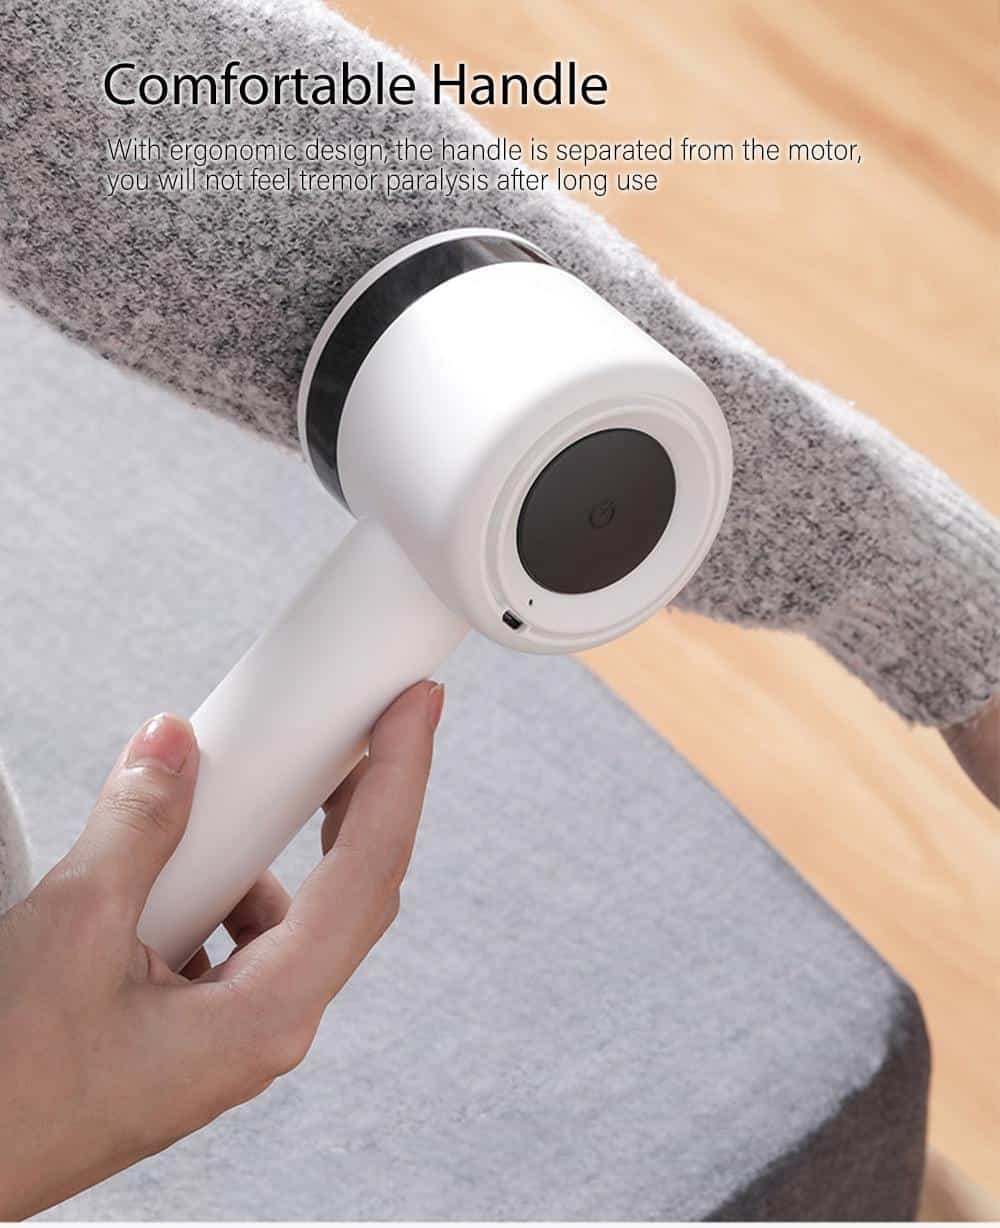 Deerma Lint Remover Hair Ball Trimmer Sweater Remover Portable 7000r/min Motor Trimmer Concealed sticky Hair Tube